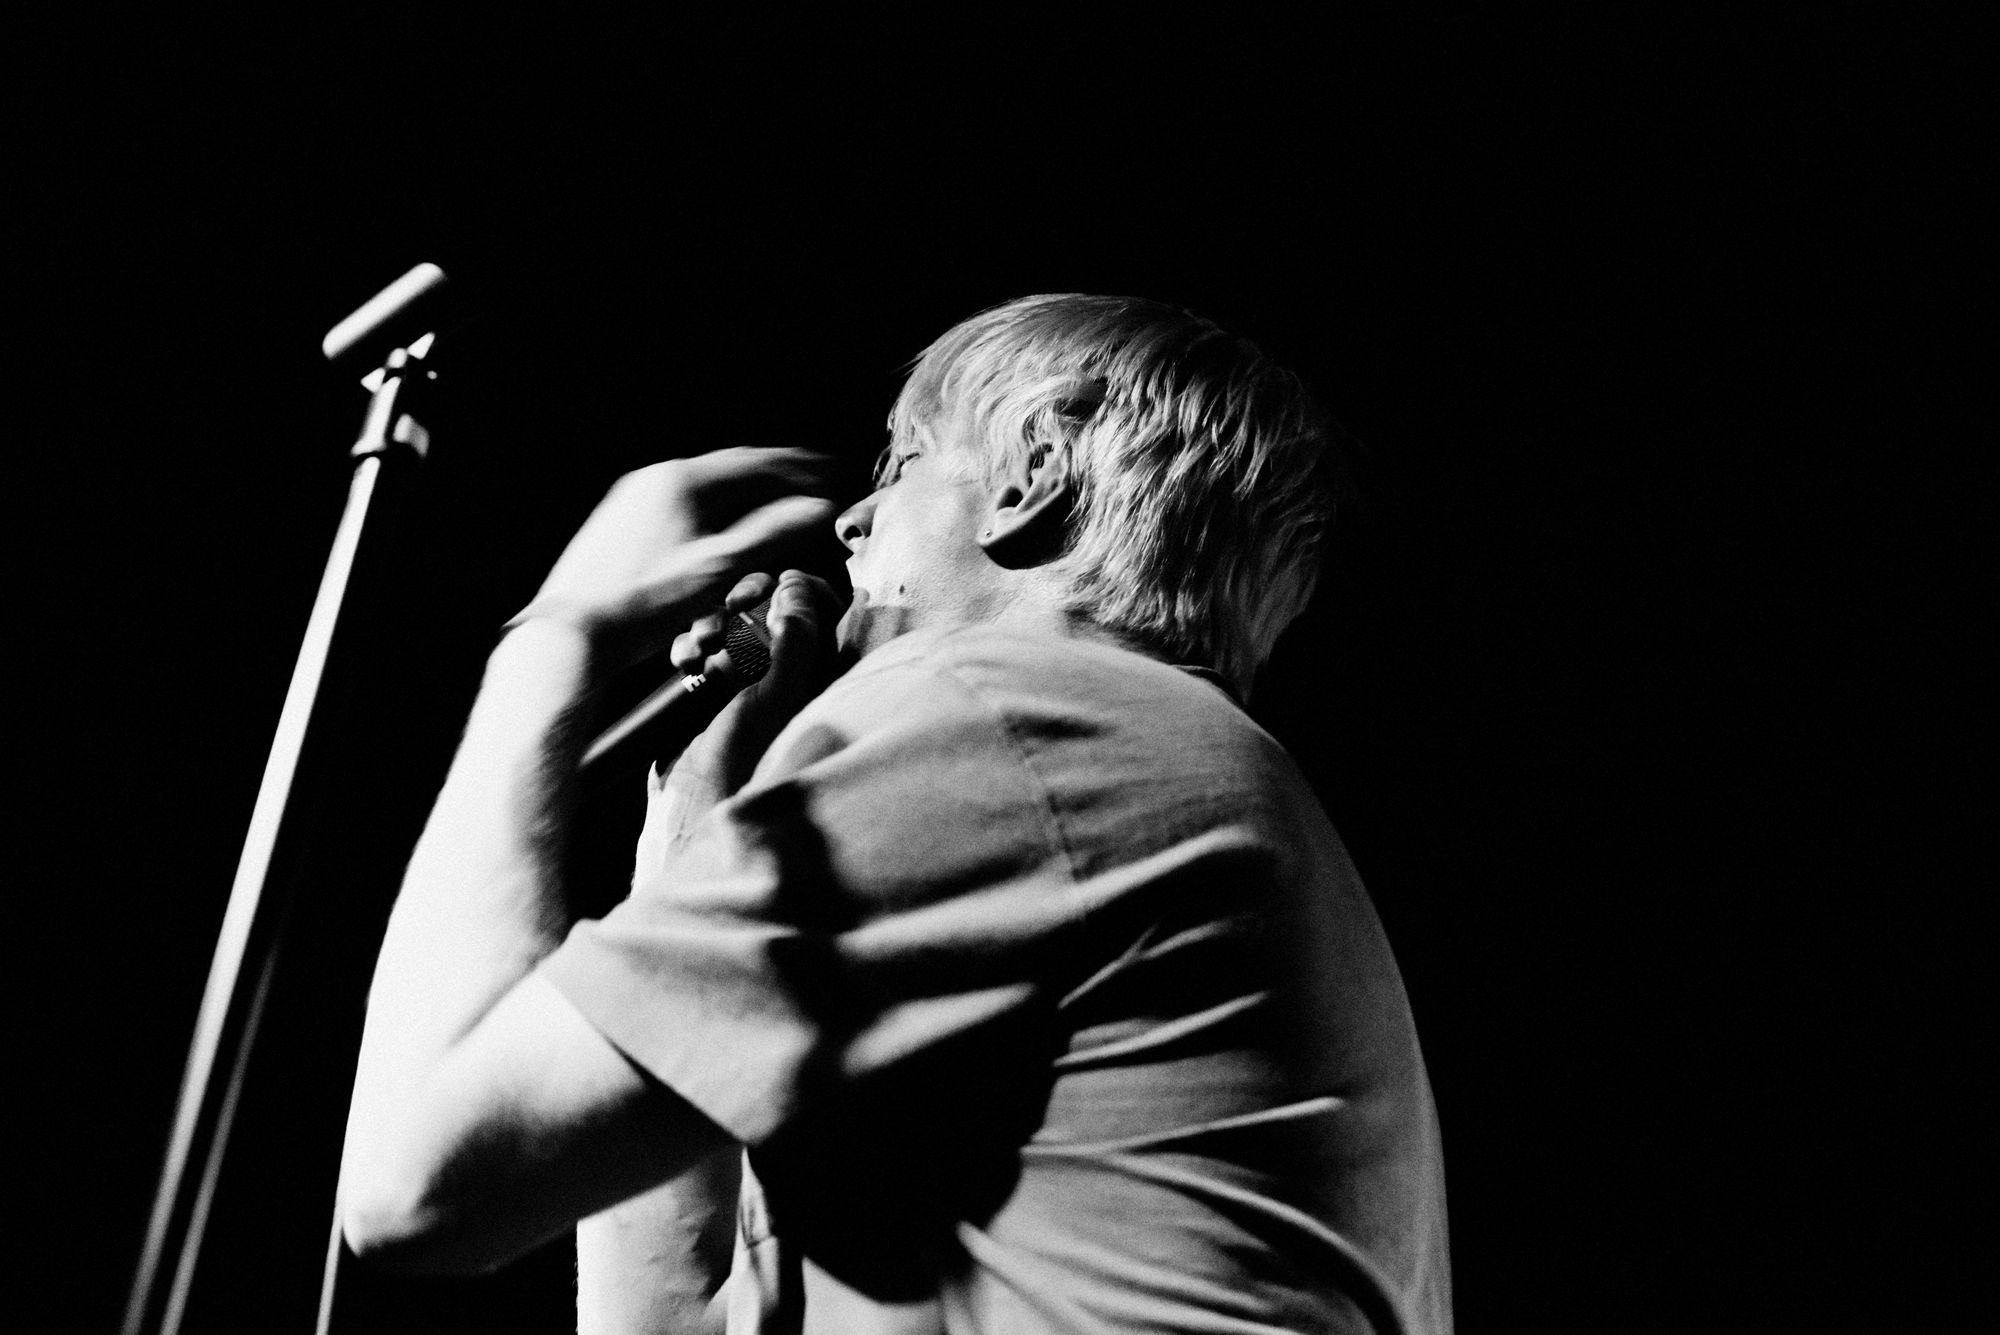 A black and white photo of a man singing into a microphone, mid-motion.